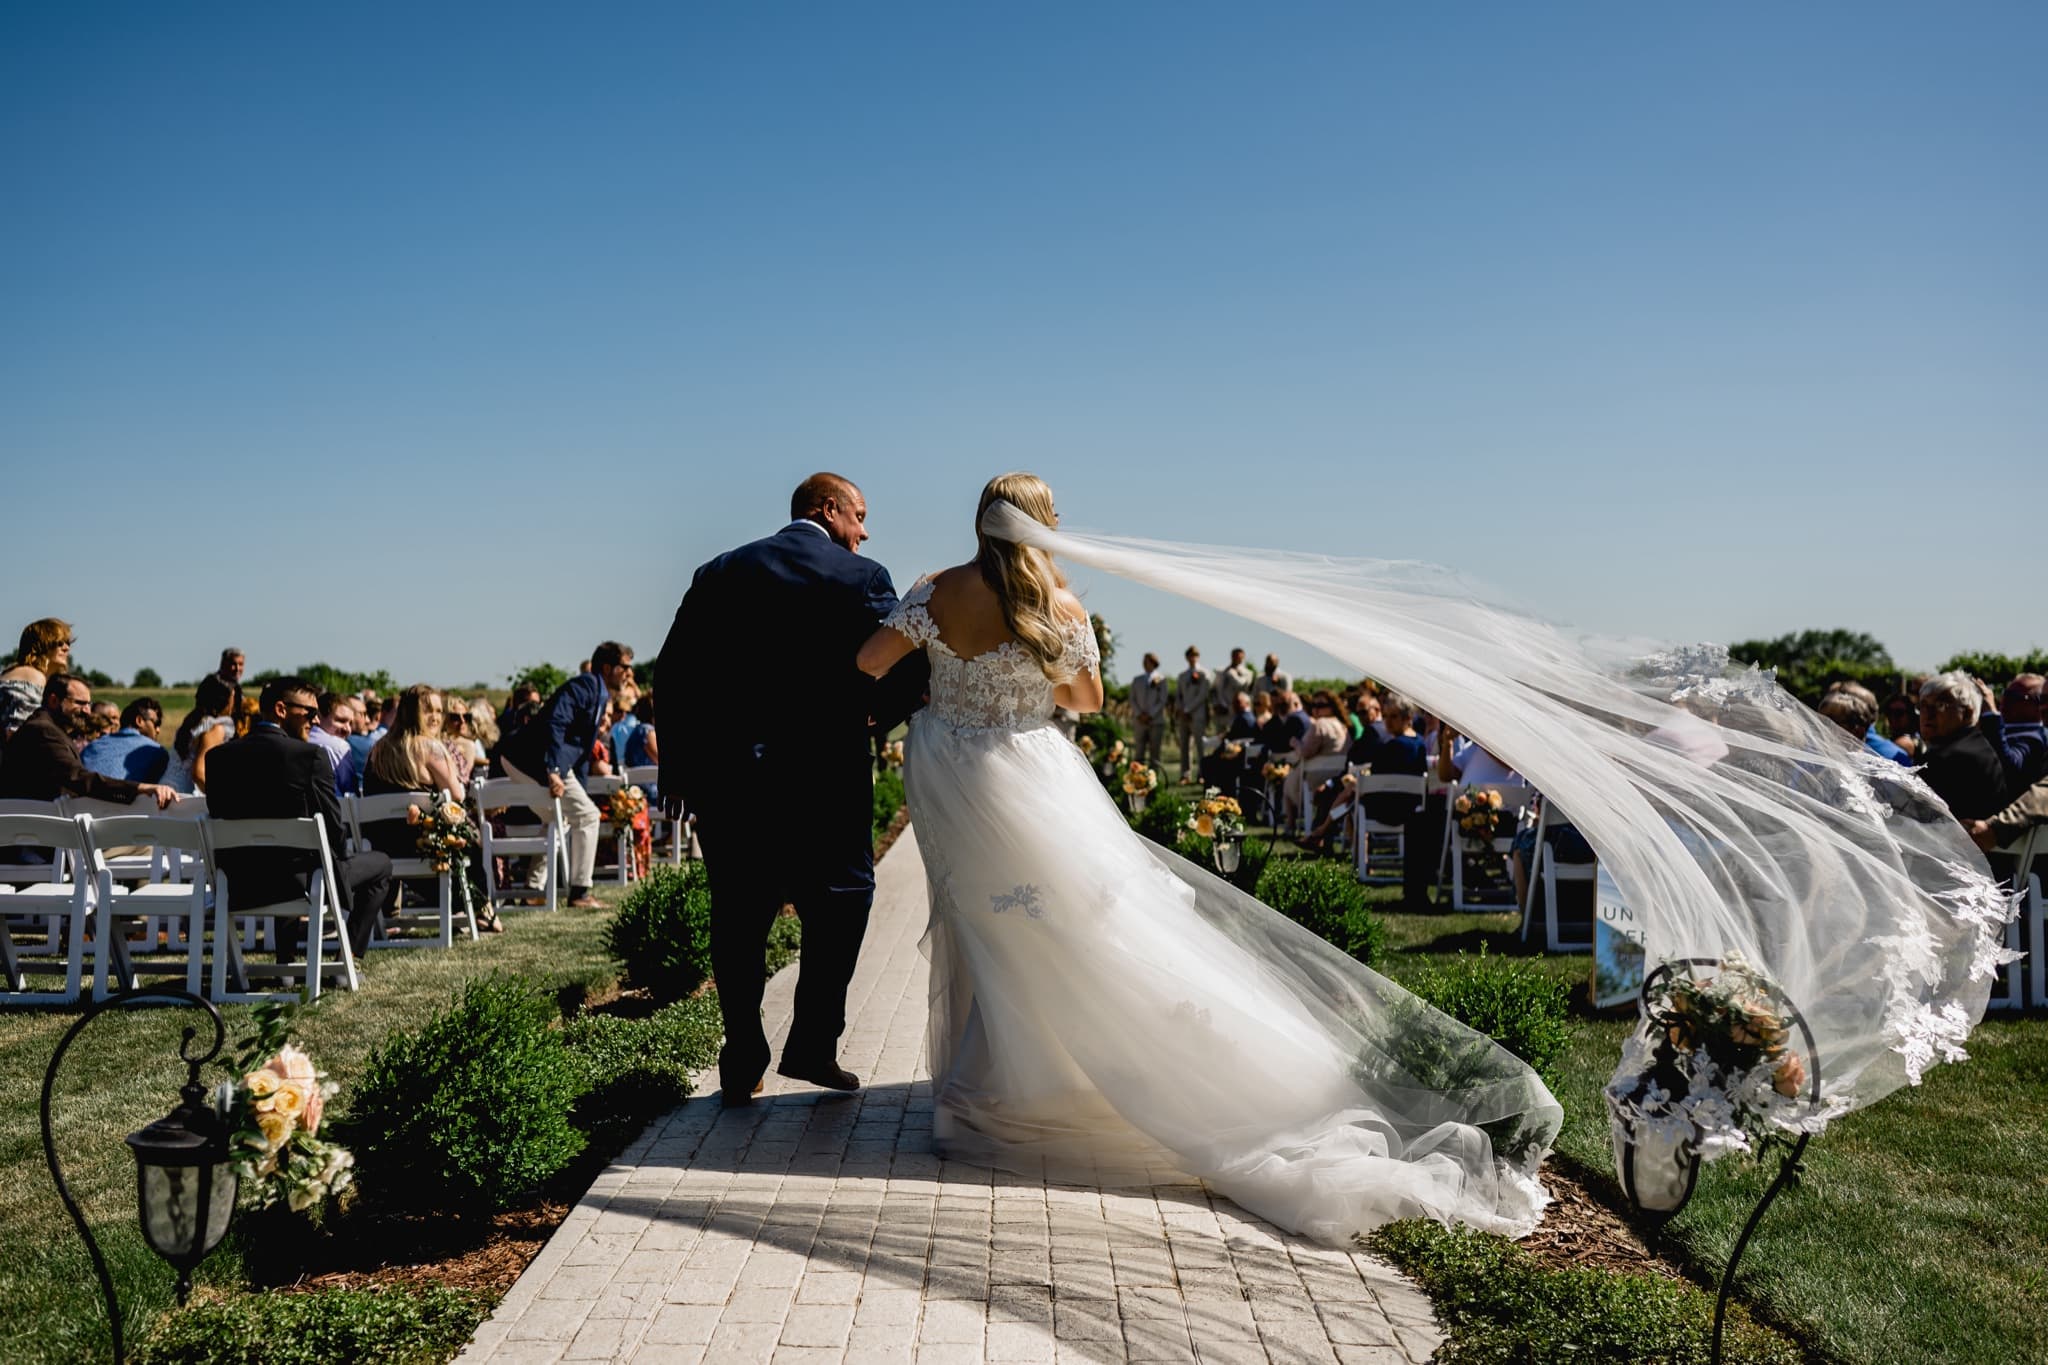 wind blowing the brides veil during ceremony